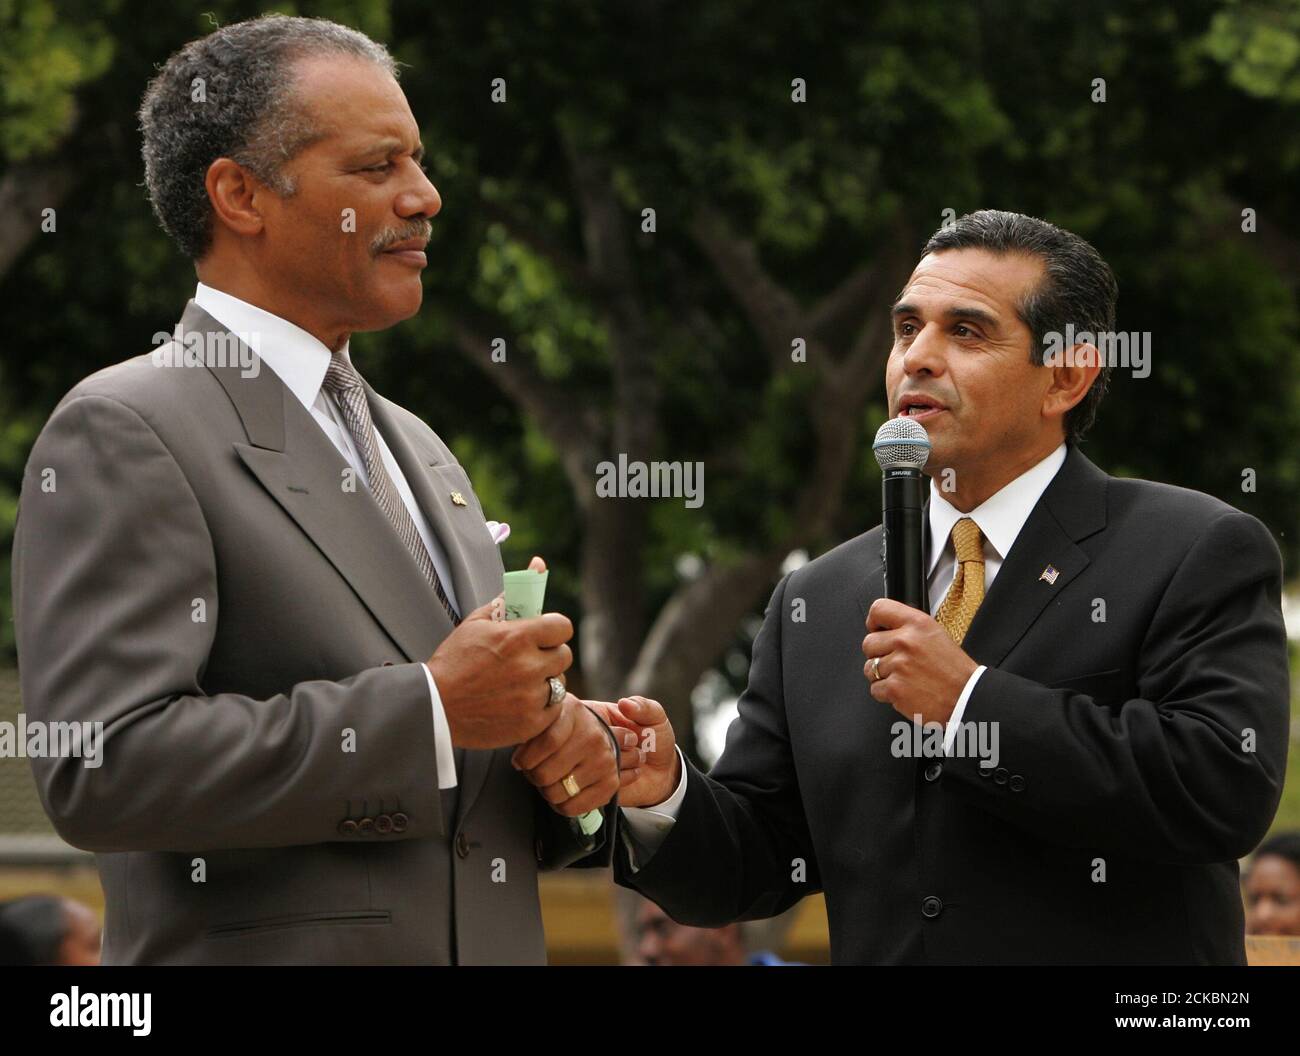 Los Angeles mayoral candidate Antonio Villaraigosa (R) gives a speech with Bernard C. Parks at a Cinco de Mayo student festival at Crenshaw High School, in Los Angeles, May 5, 2005. Parks is a city councilmember in South Los Angeles, a historically black neighborhood that is now 40 percent Latino. Villaraigosa will be the city's first Latino mayor in 133 years if he wins the runoff election May 17 against incumbent Mayor James Hahn. REUTERS/Lucy Nicholson  LN/HK Stock Photo